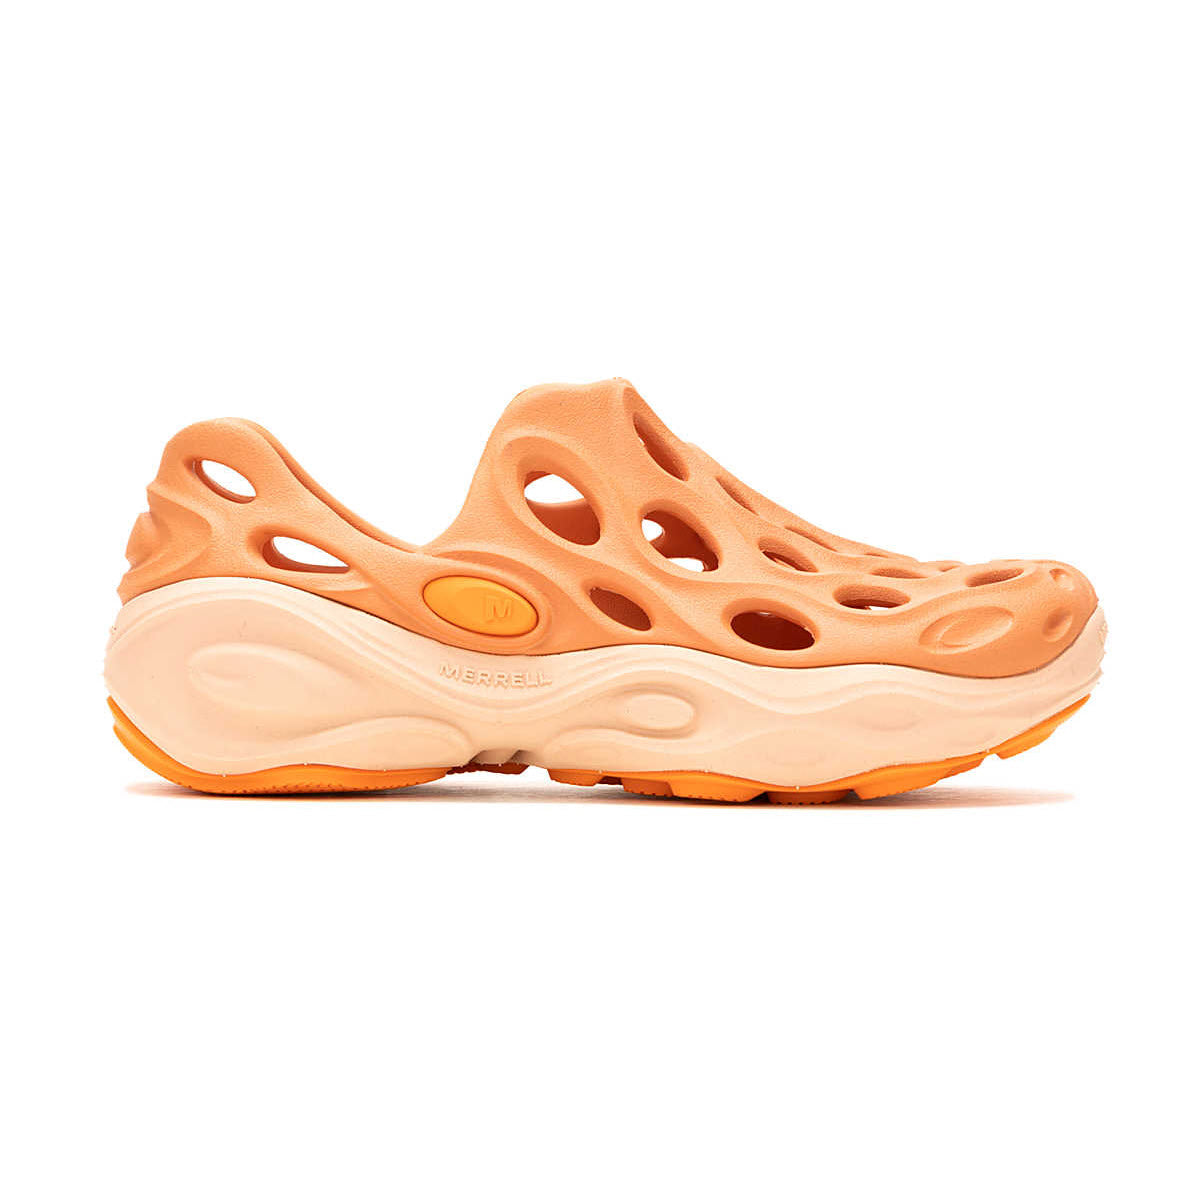 A side view of a single orange Merrell Hydro Next Gen shoe against a white background.